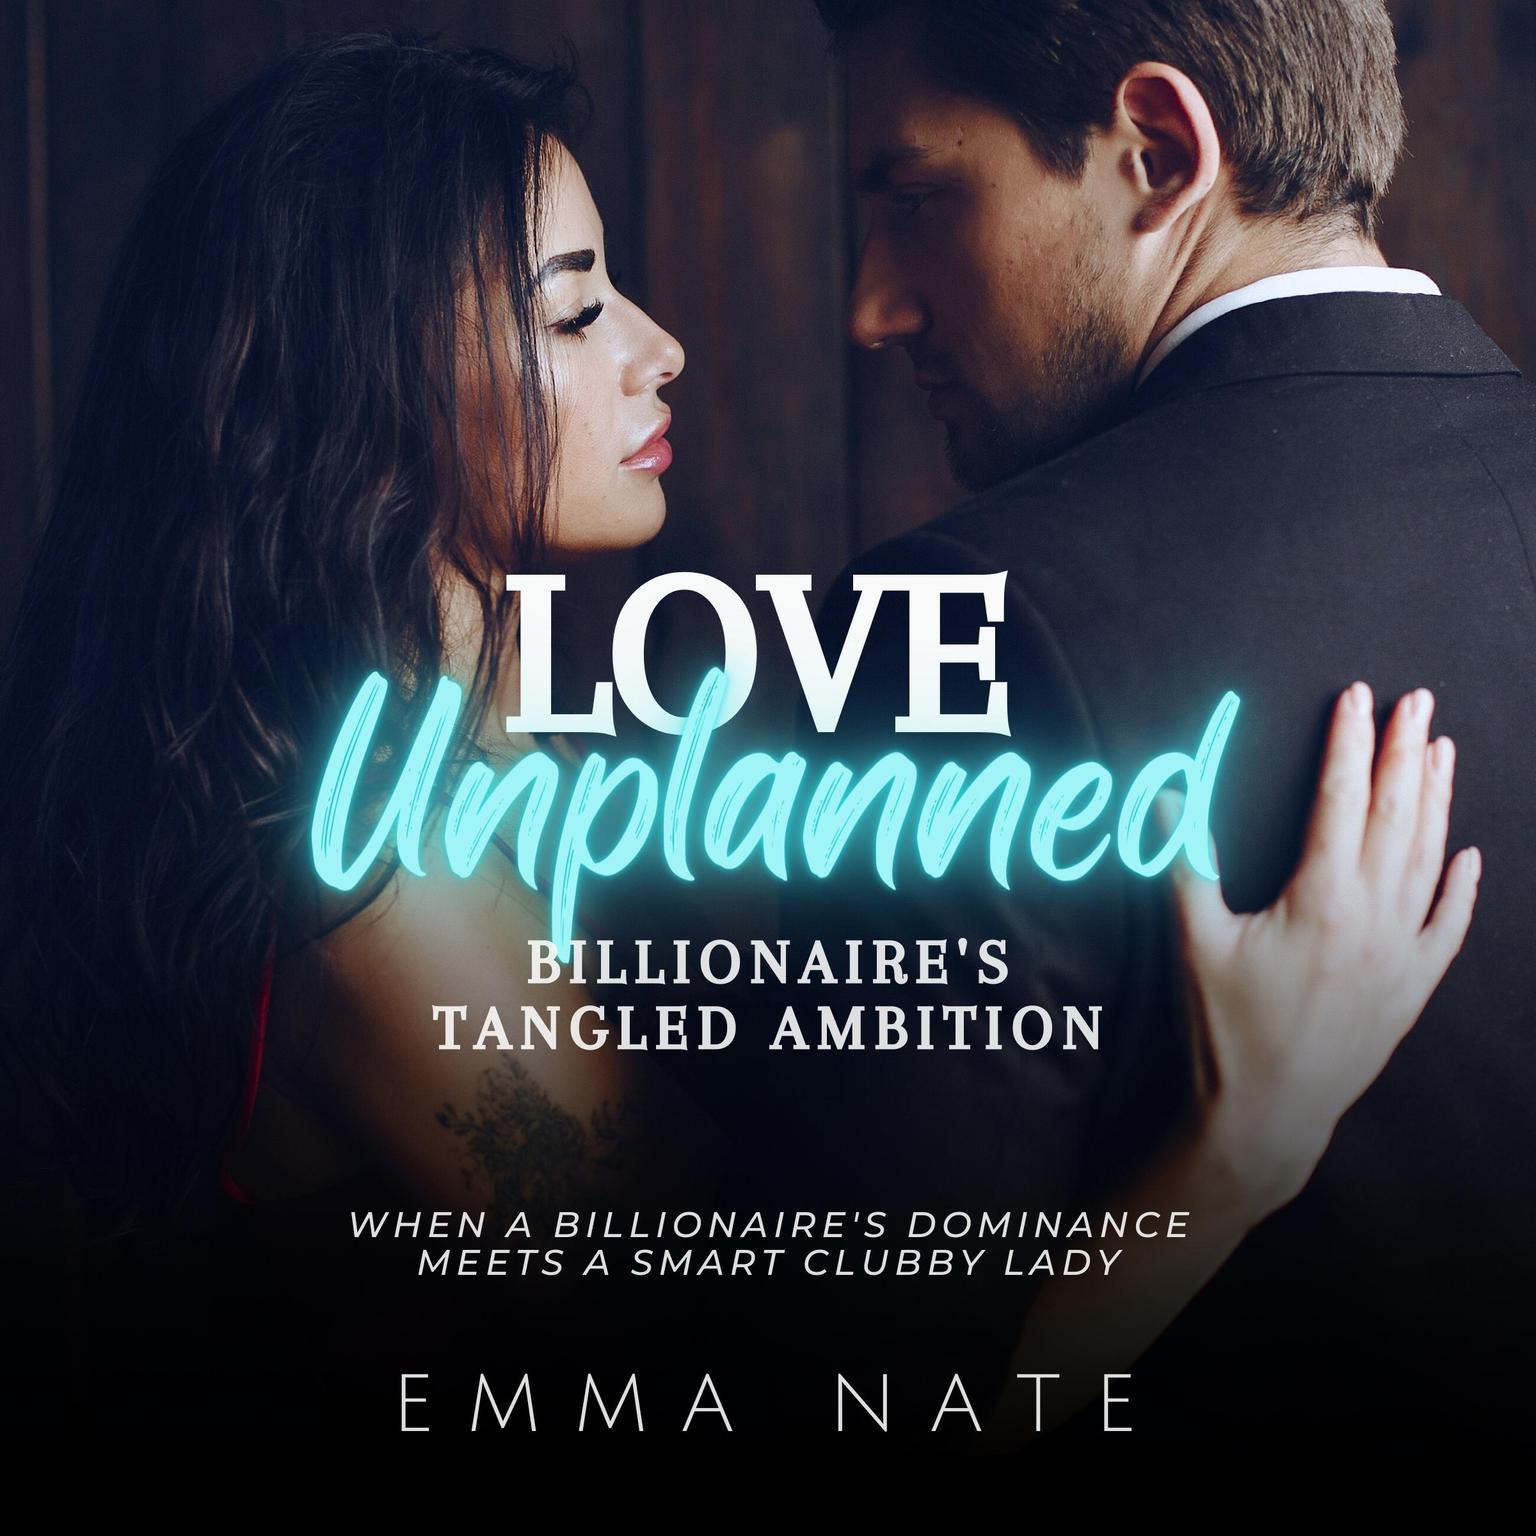 Love Unplanned: Billionaire’s Tangled Ambition: When a Billionaire’s Dominance Meets a Smart Clubby Lady Audiobook, by Emma Nate